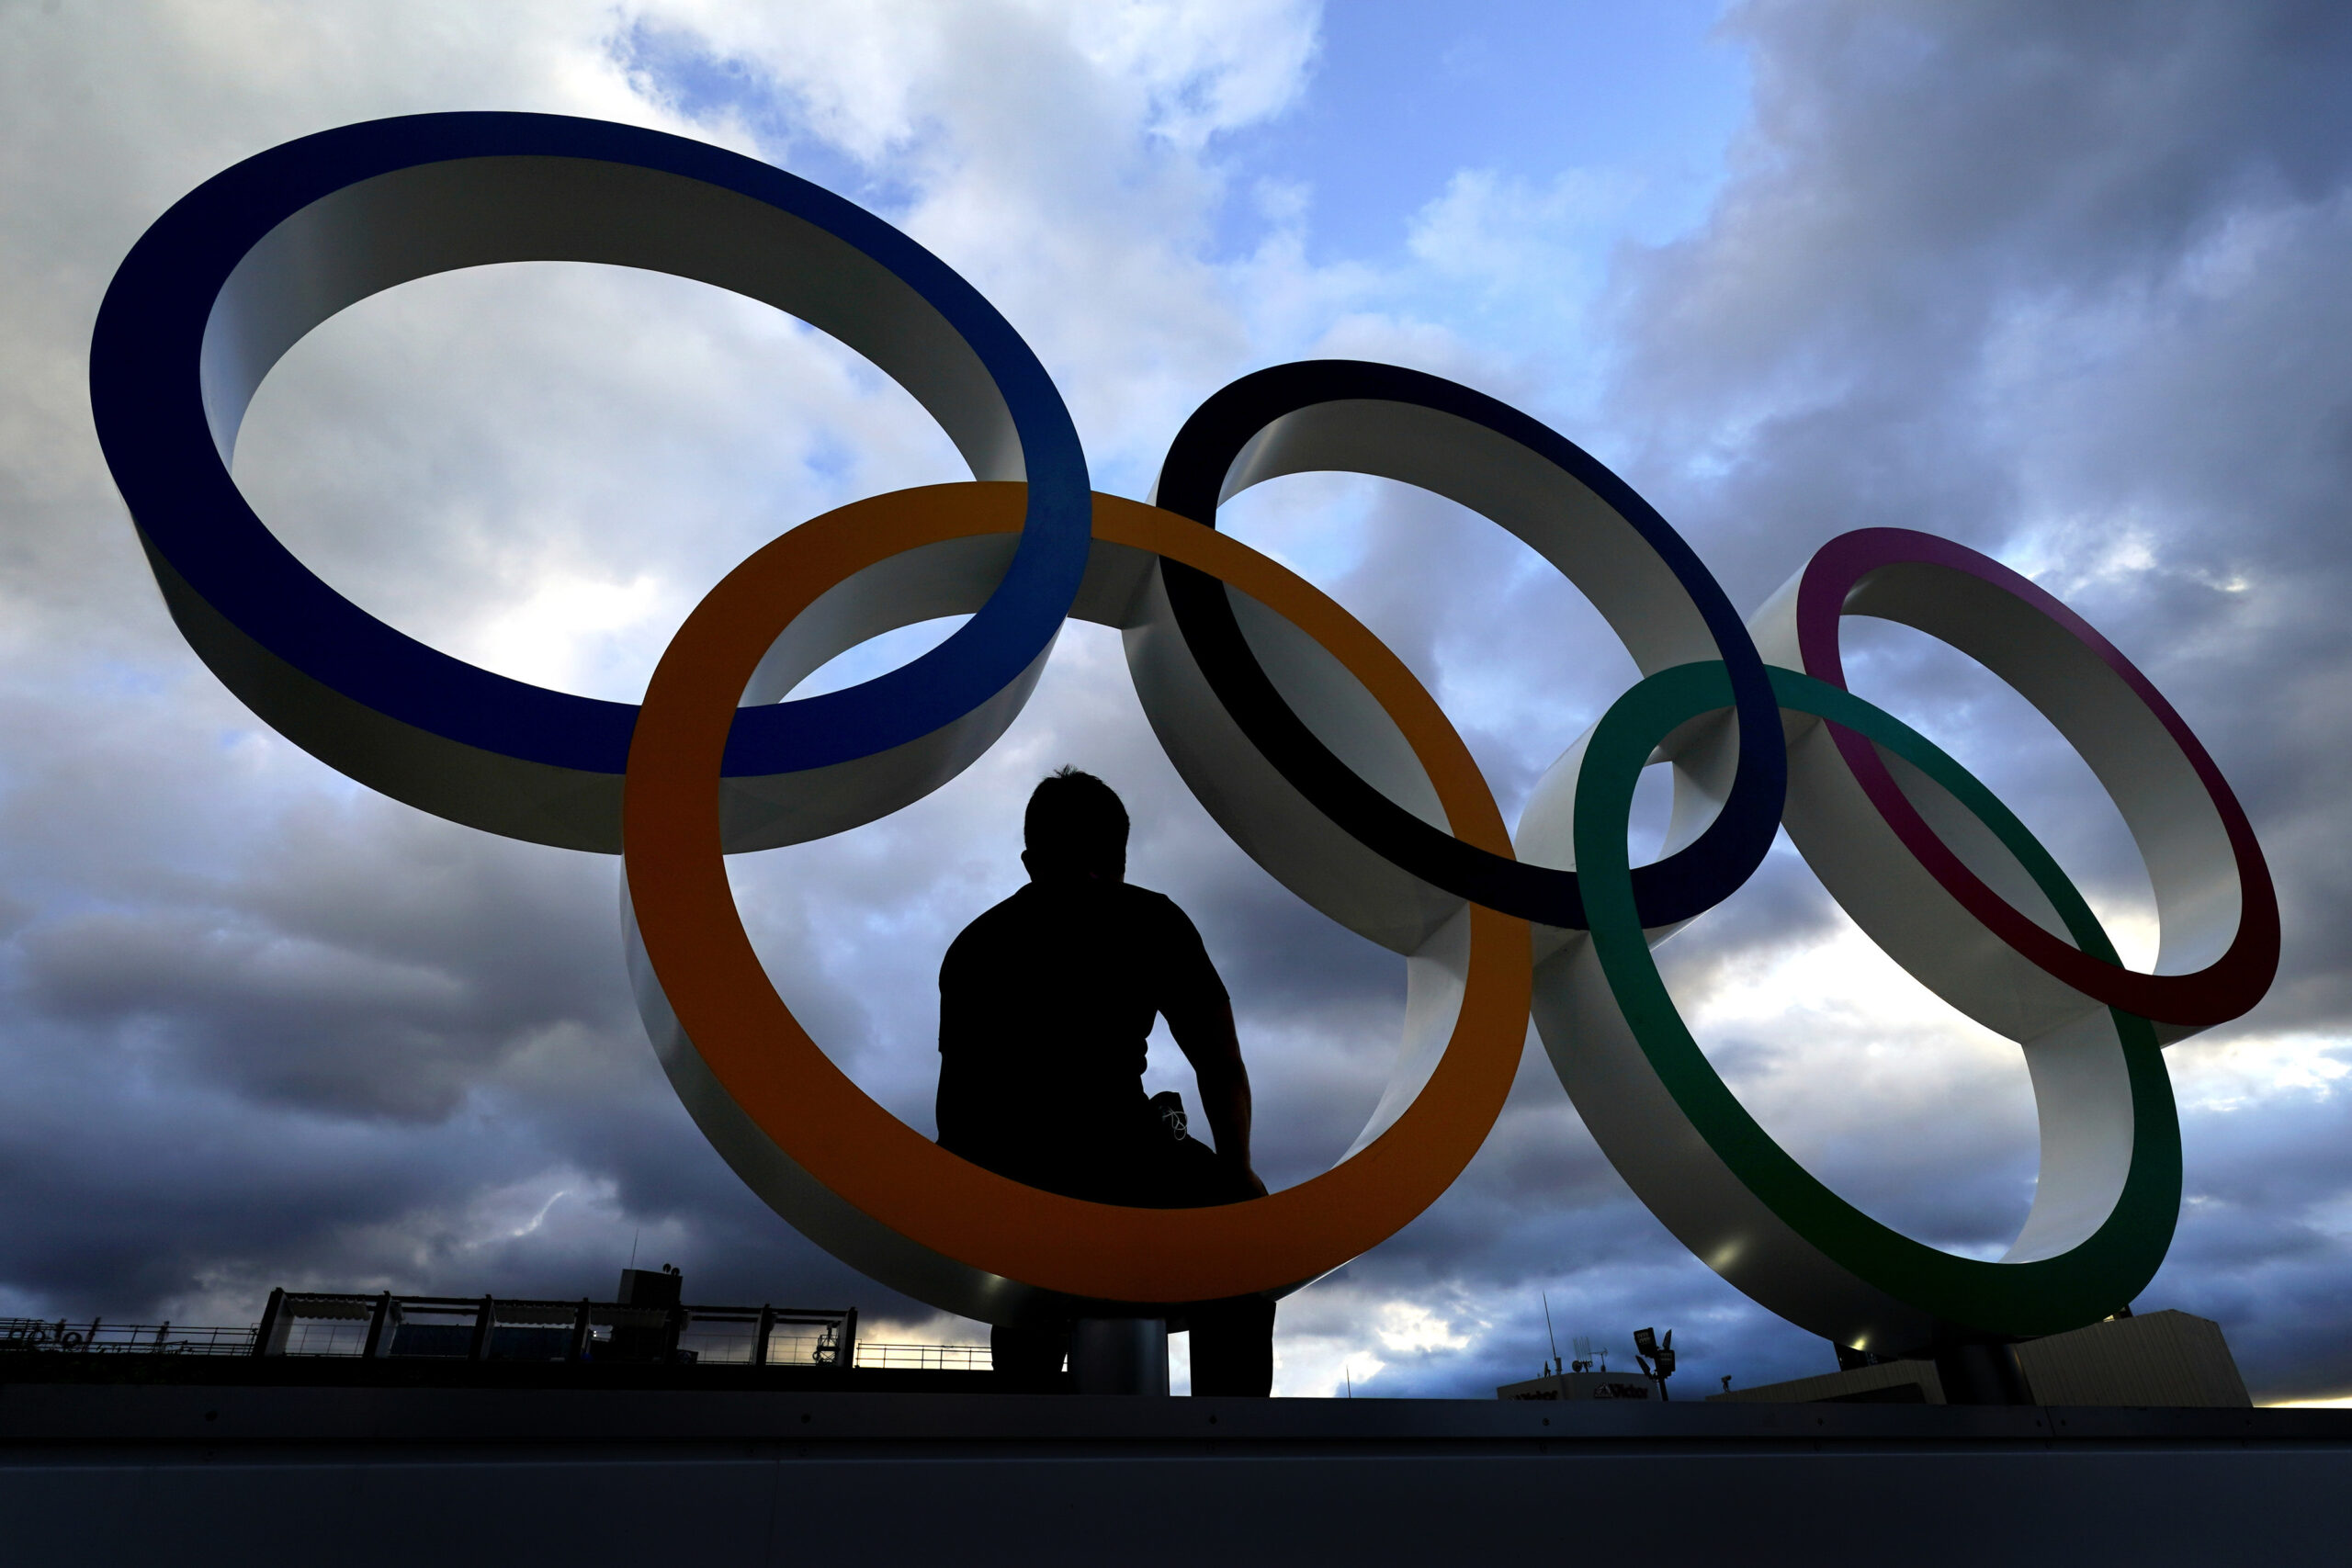 A man poses for a photo in a set of Olympic rings outside the Olympic Stadium